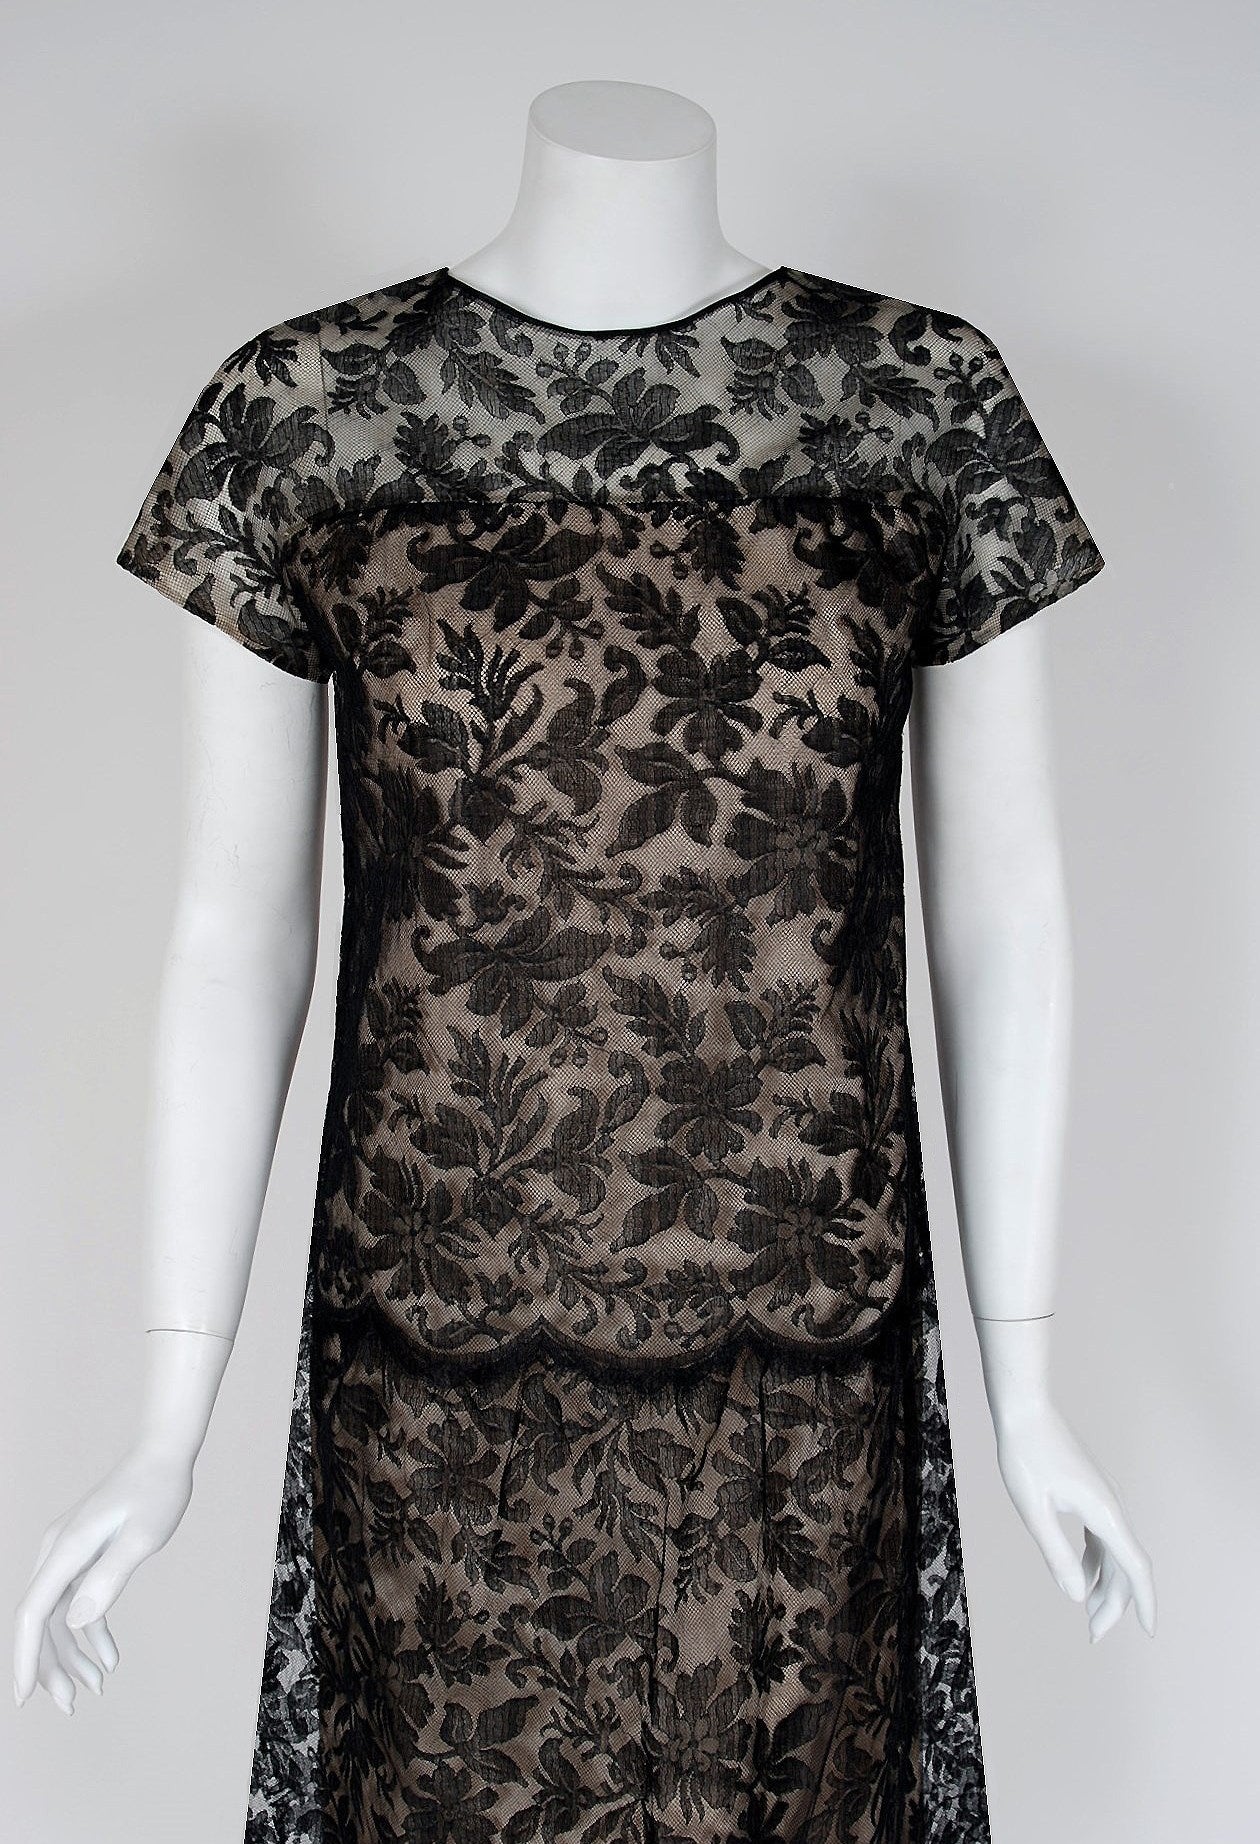 Givenchy, the name itself evokes glamour, refined elegance, simplicity and style. Givenchy's trademark of sculpted lines and luxurious fabrics make his work easily recognizable. This gorgeous black lace cocktail is a beautiful example of his